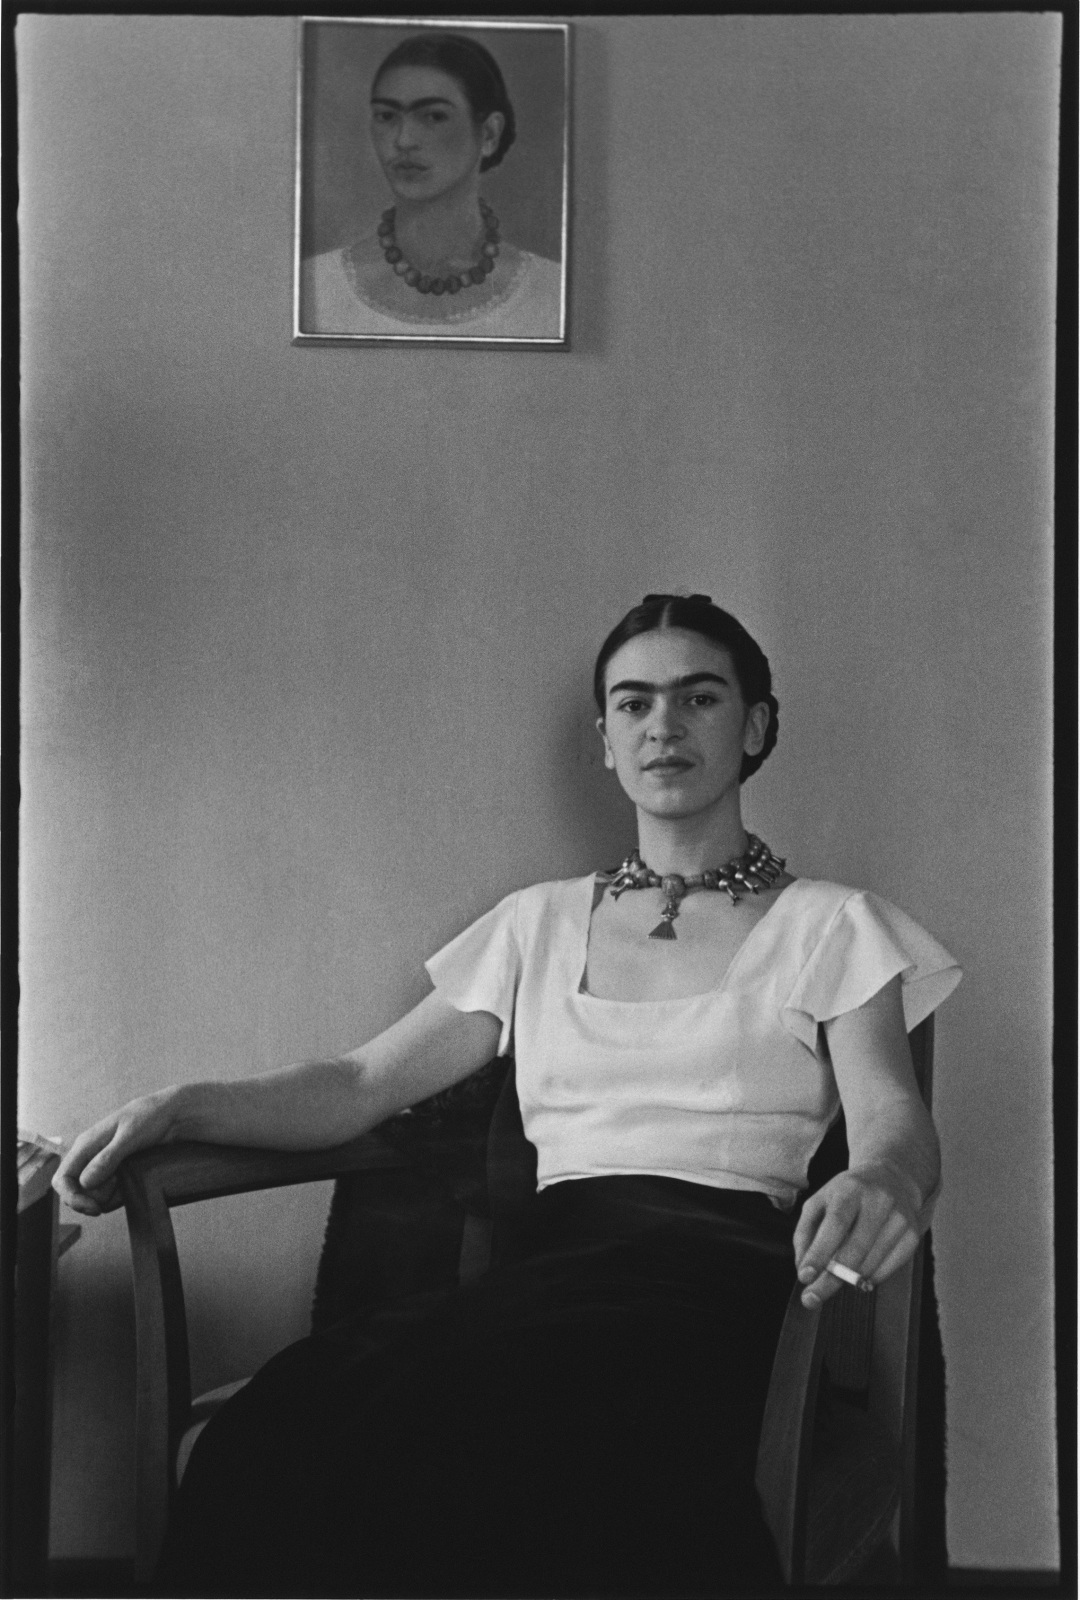 Frida Kalho sits in a chair and looks at the camera while holding a cigarette and sitting beneath one of her self-portraits.